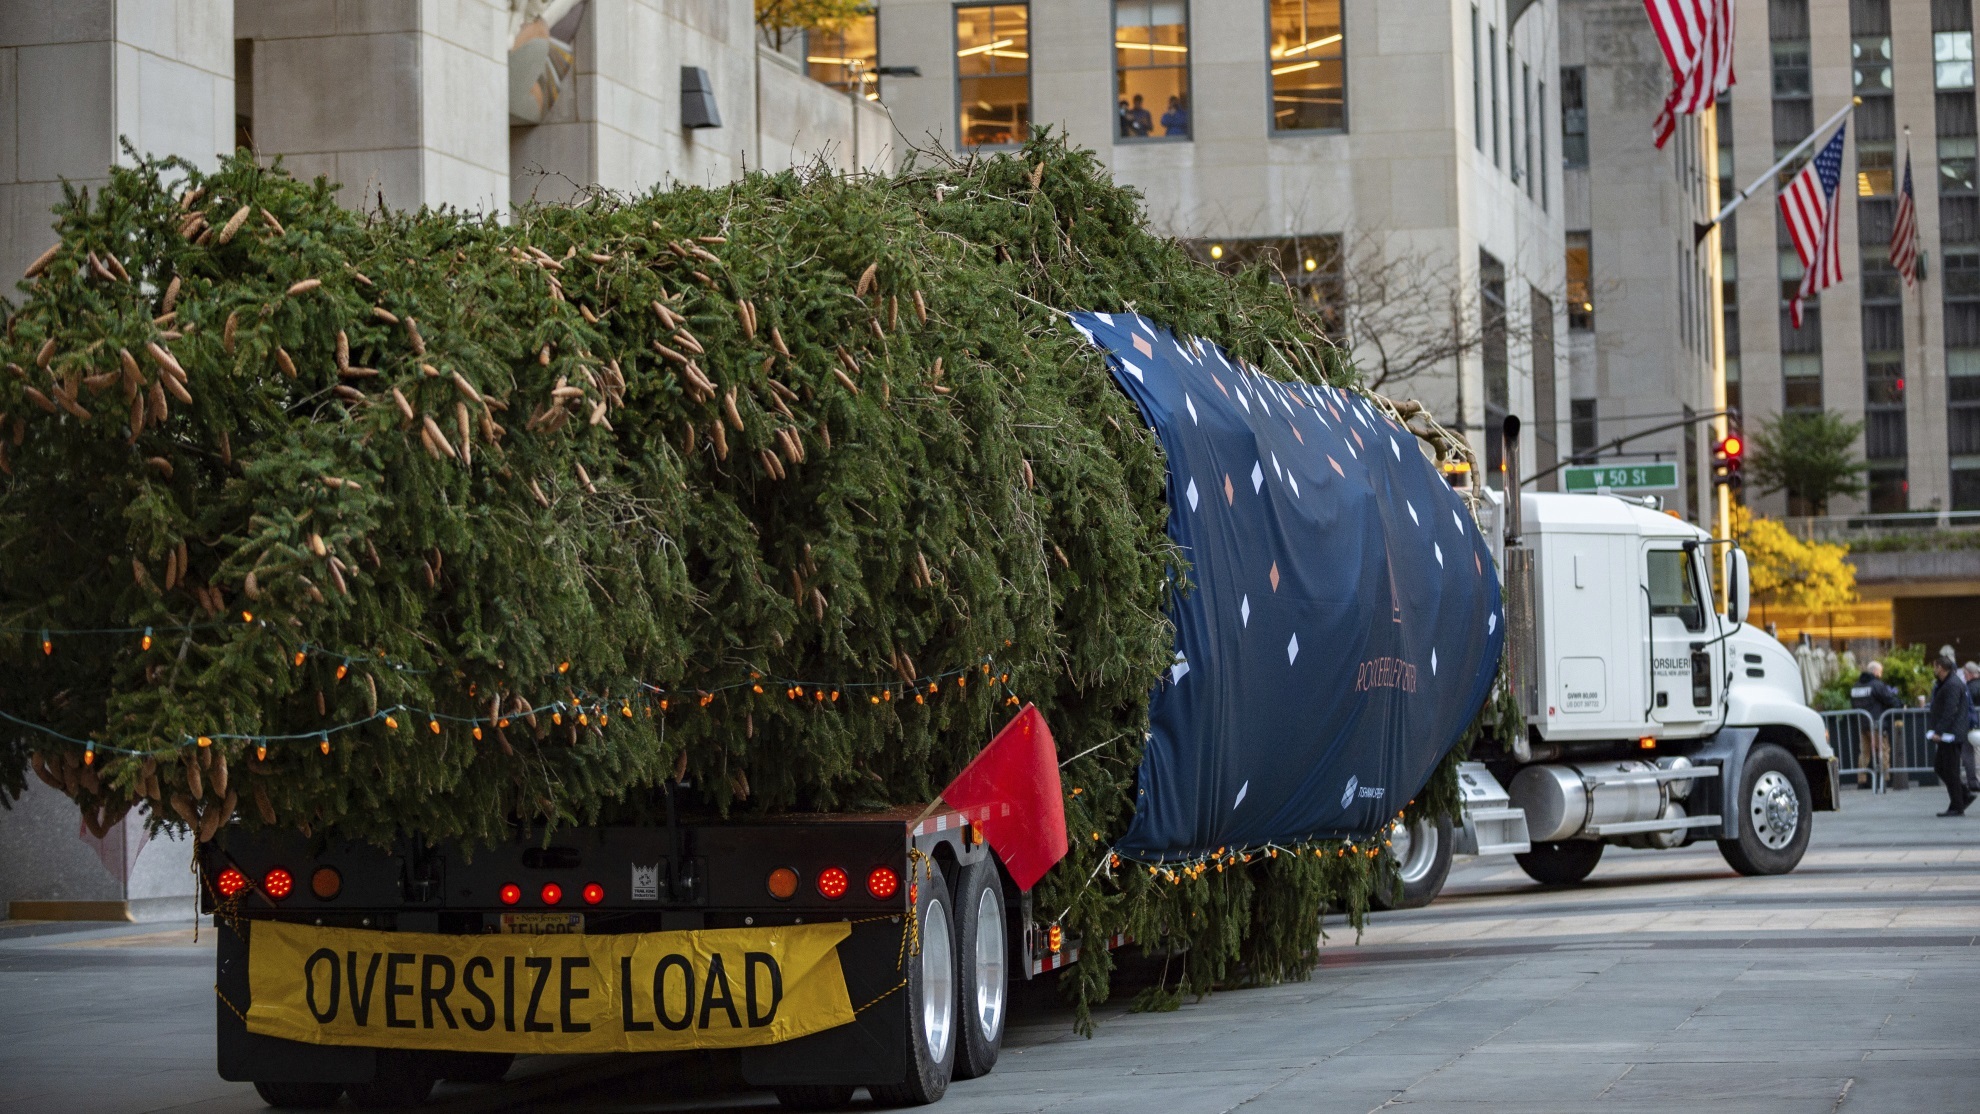 The 2021 Rockefeller Center Christmas tree, a 79-foot tall, 12-ton Norway Spruce from Elkton, Md.